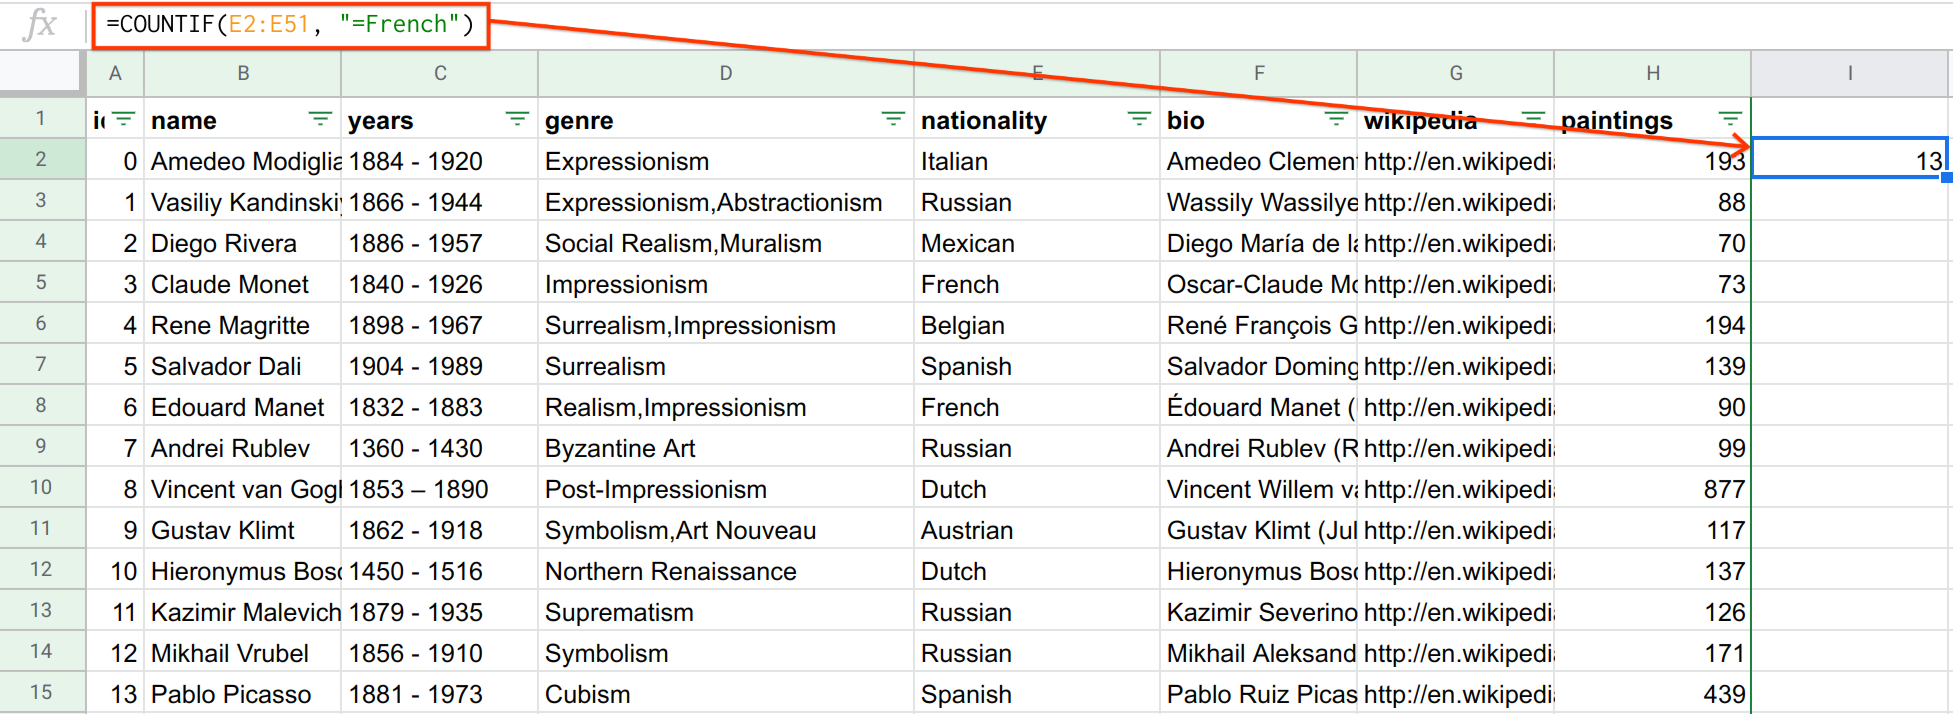 A screenshot from Sheets of a painters dataset grouped to count the number of painters whose nationality is French.